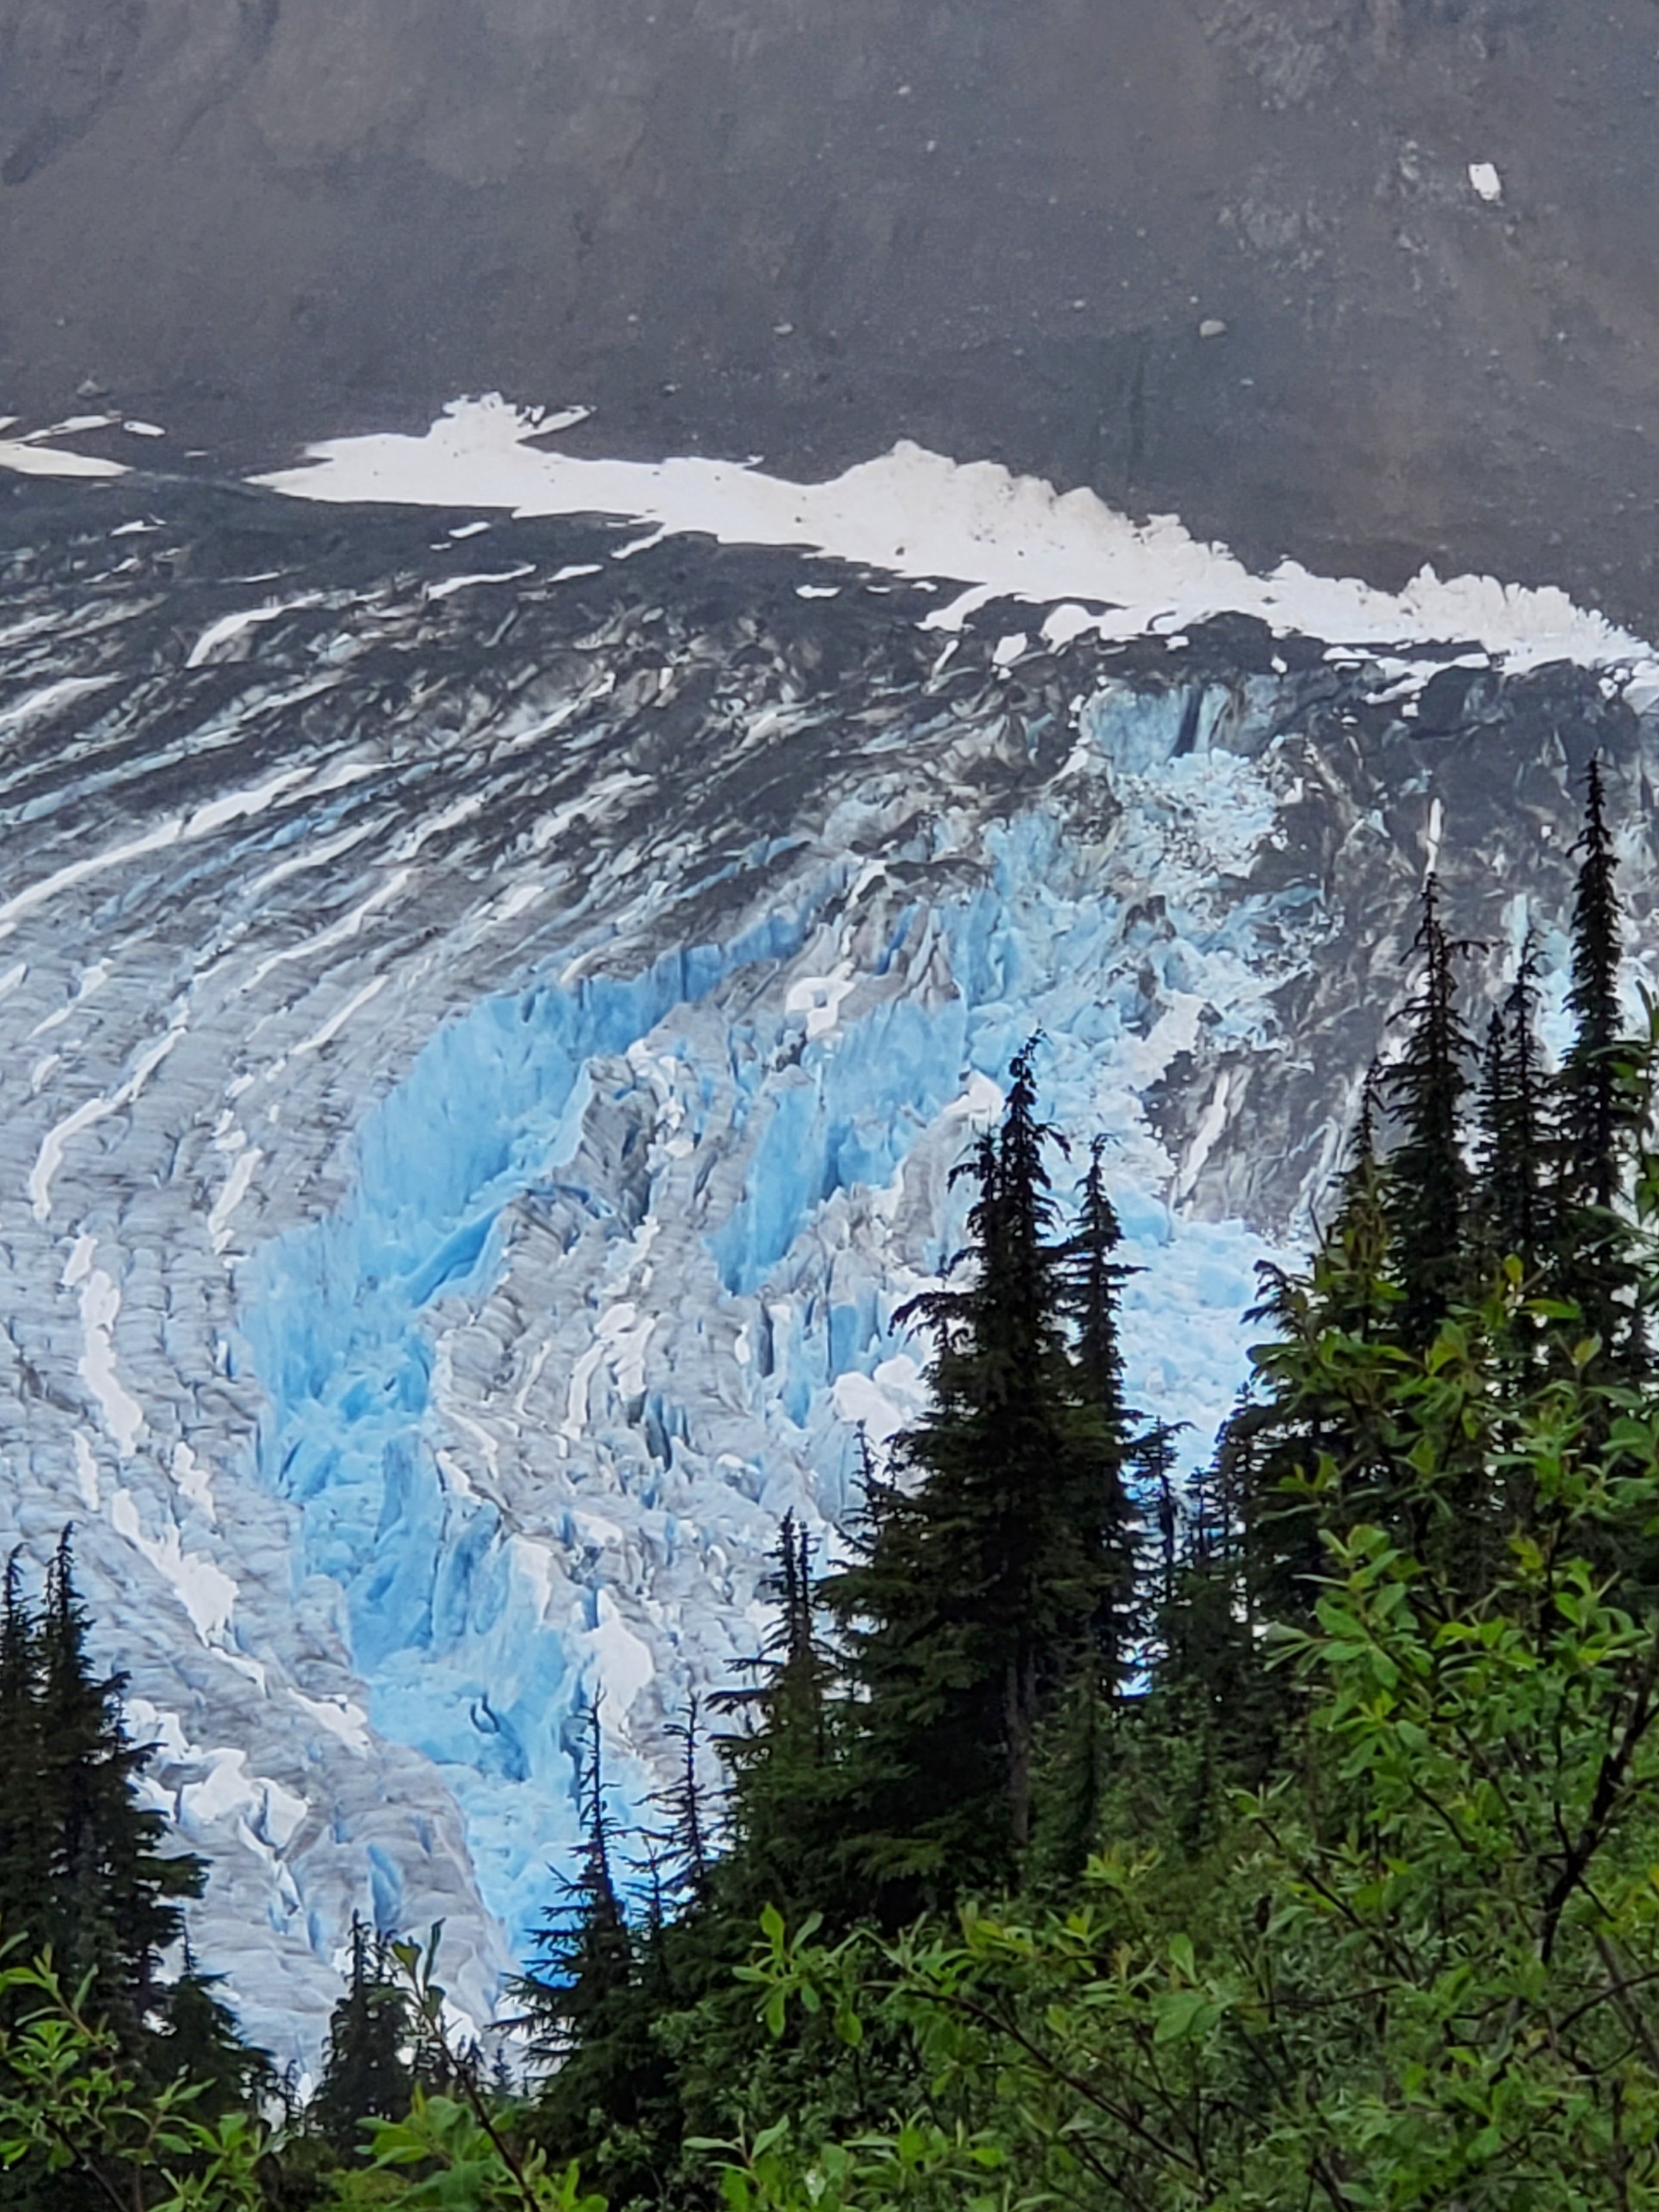  The deep blues of the Salmon Glacier are surreal. Hyder, AK. 